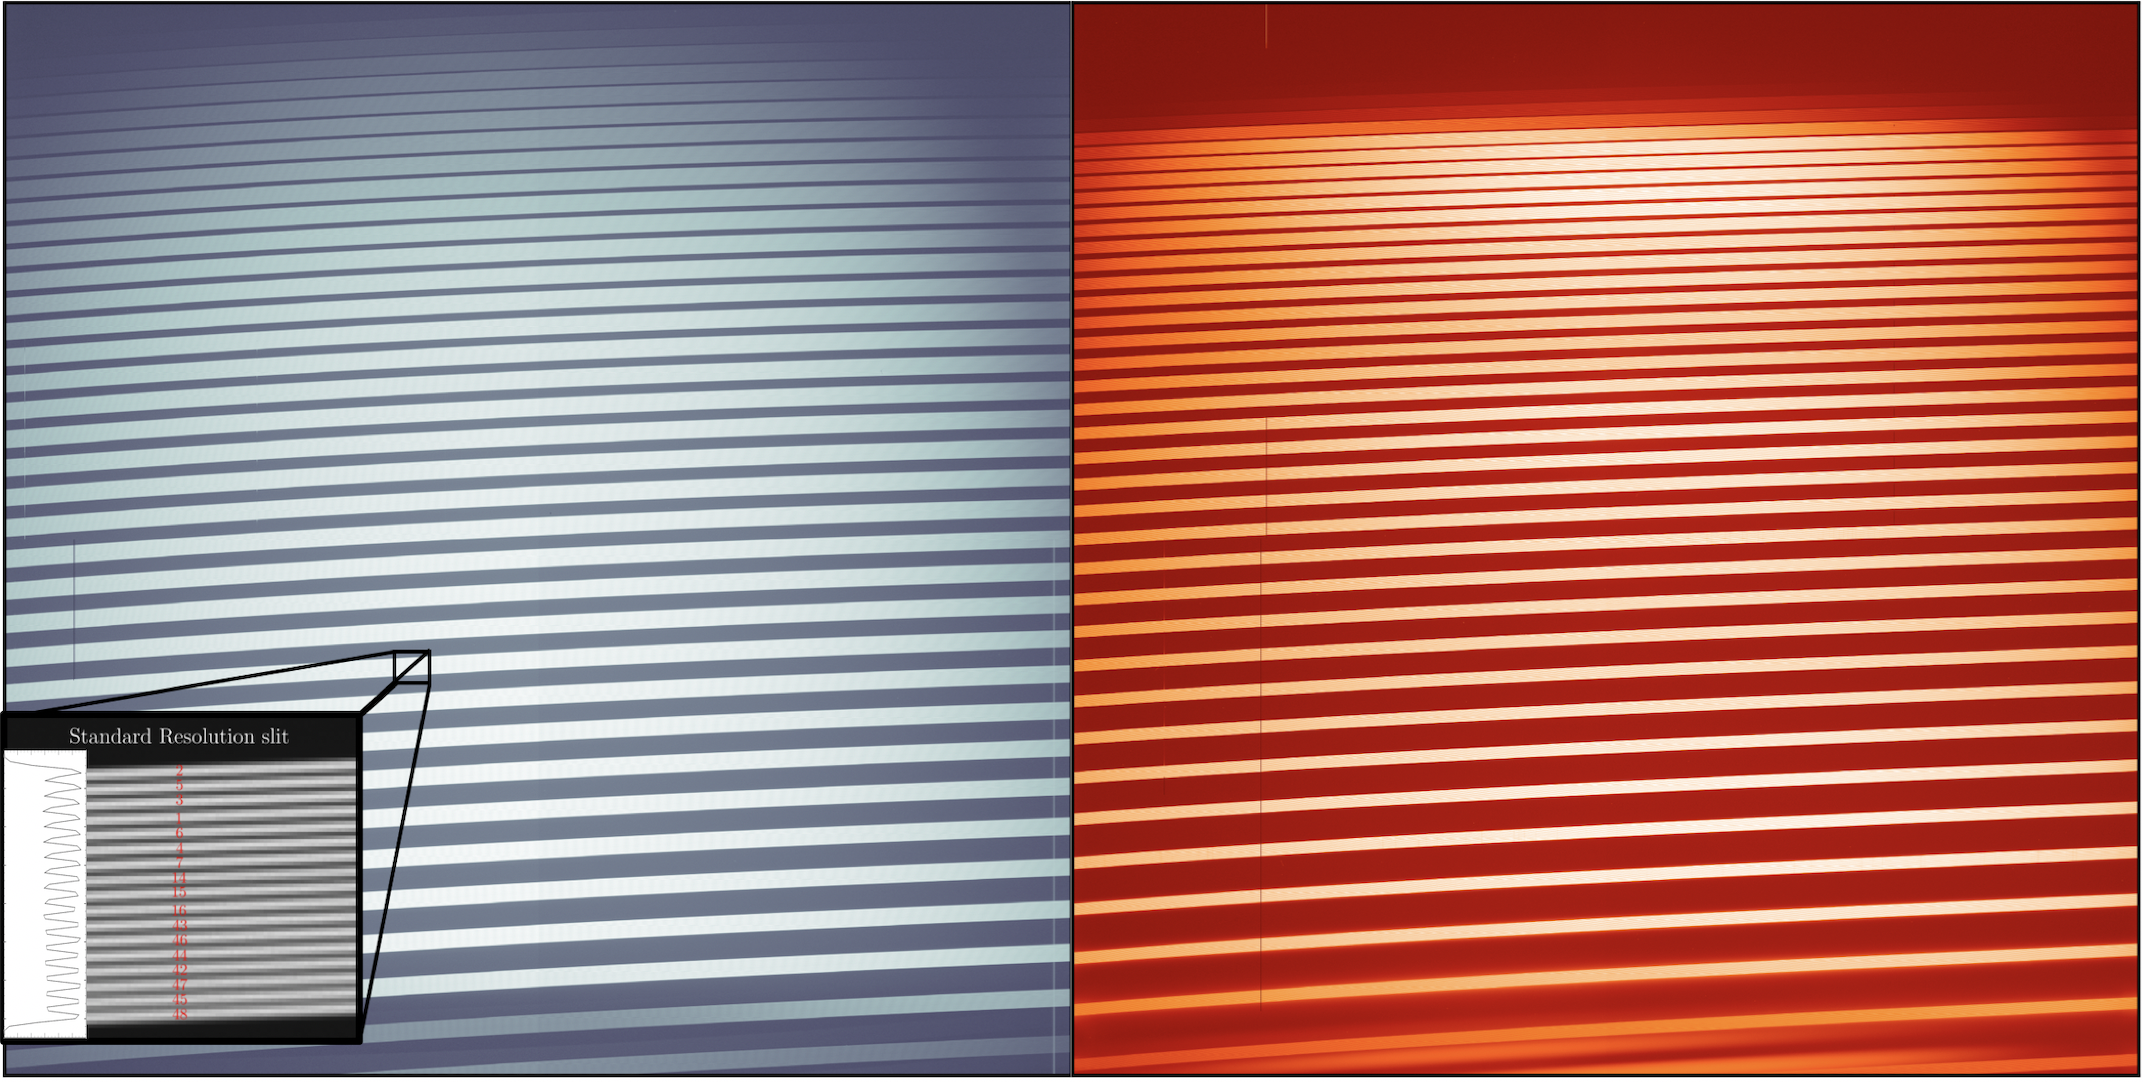 GHOST echellogram in both the blue (left) and red (right).